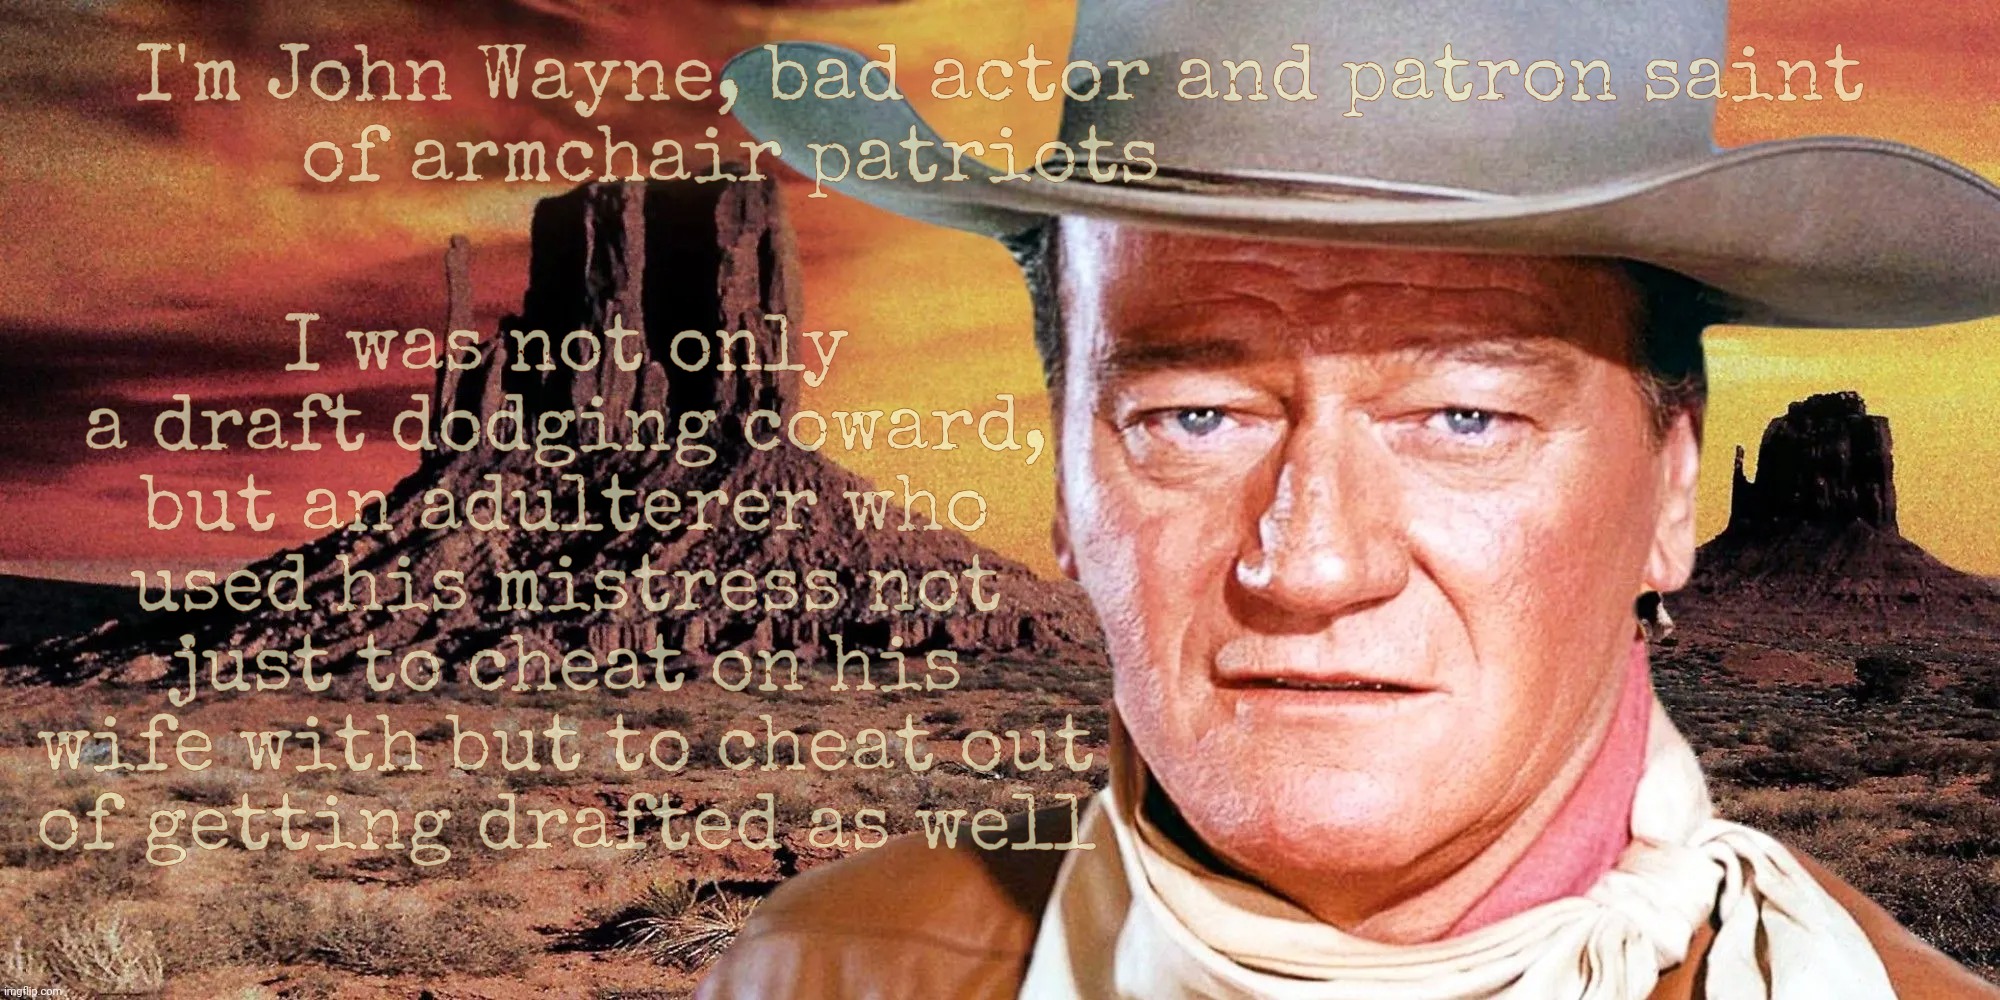 John Wayne was a cheating draft dodging coward who had Marlena Dietrich get him to be deferred from fighting in WWII | I'm John Wayne, bad actor and patron saint
of armchair patriots; I was not only a draft dodging coward, but an adulterer who used his mistress not just to cheat on his wife with but to cheat out
of getting drafted as well | image tagged in john wayne,draft dodger,adulterer,cheater,faker,fake patriot | made w/ Imgflip meme maker